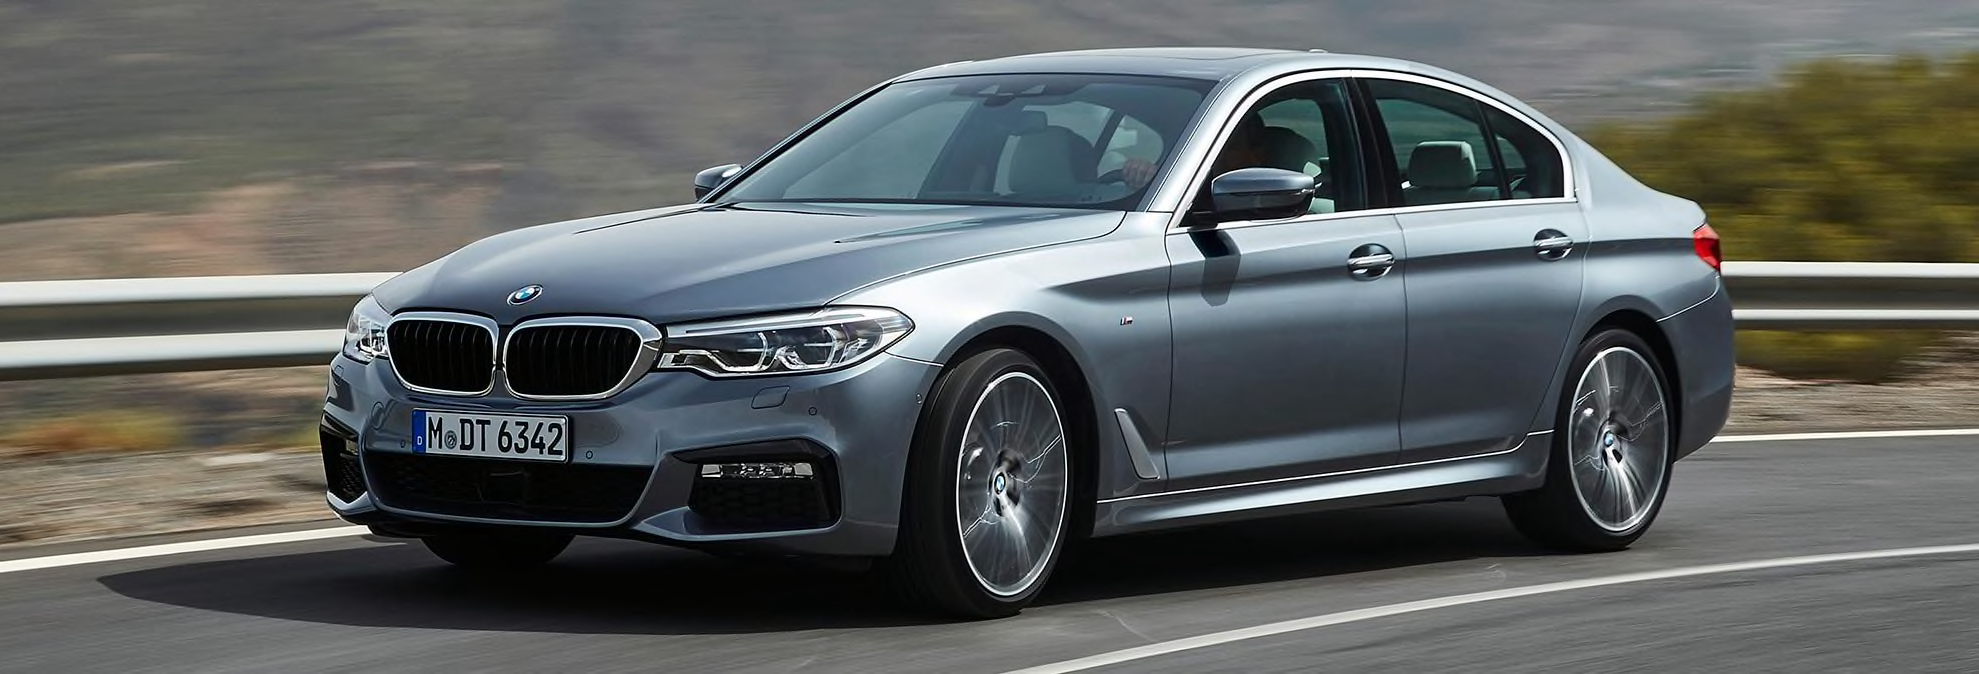 New 2017 BMW 5 Series Sheds Pounds, Piles on Tech 